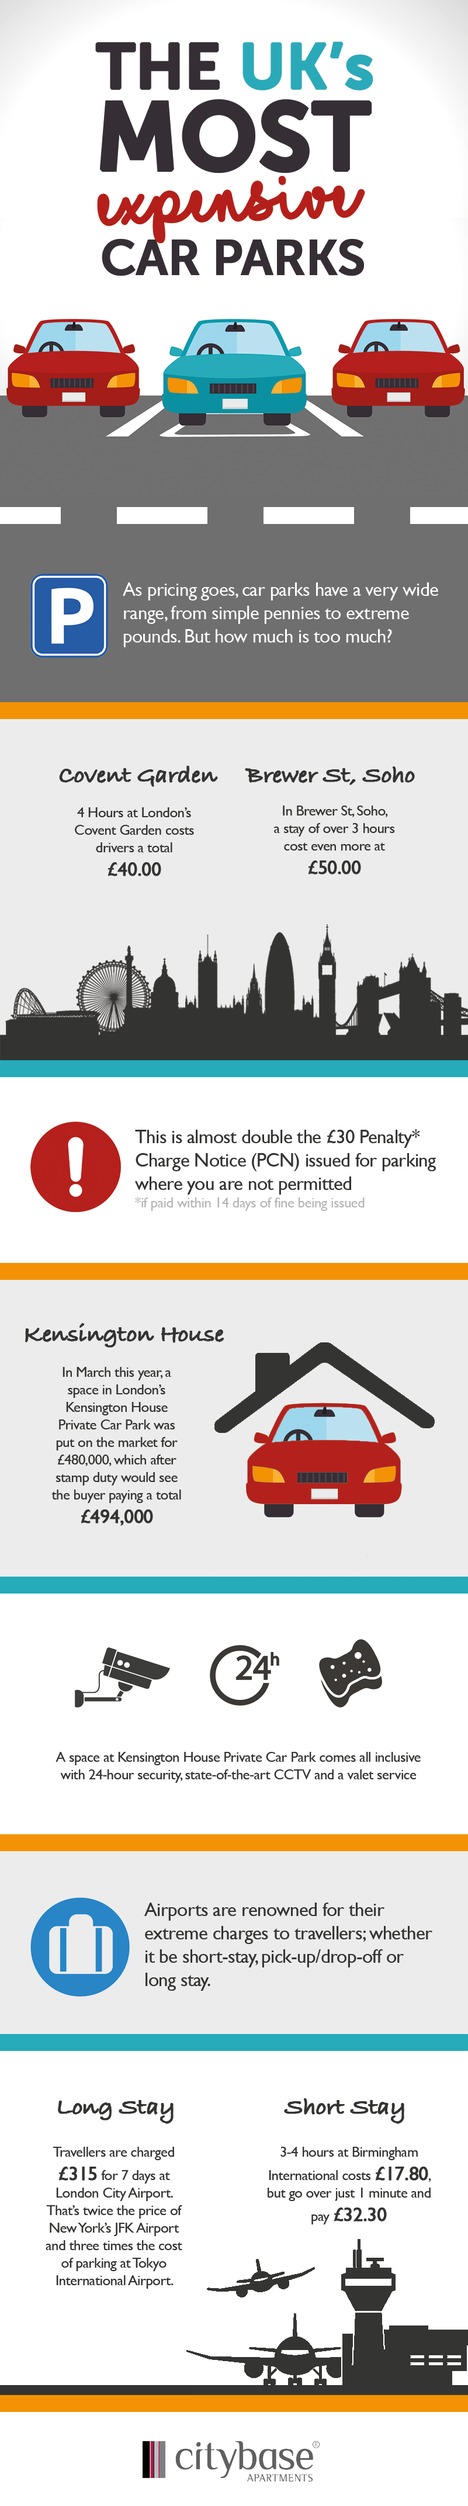 The UK's Most Expensive Car Parks